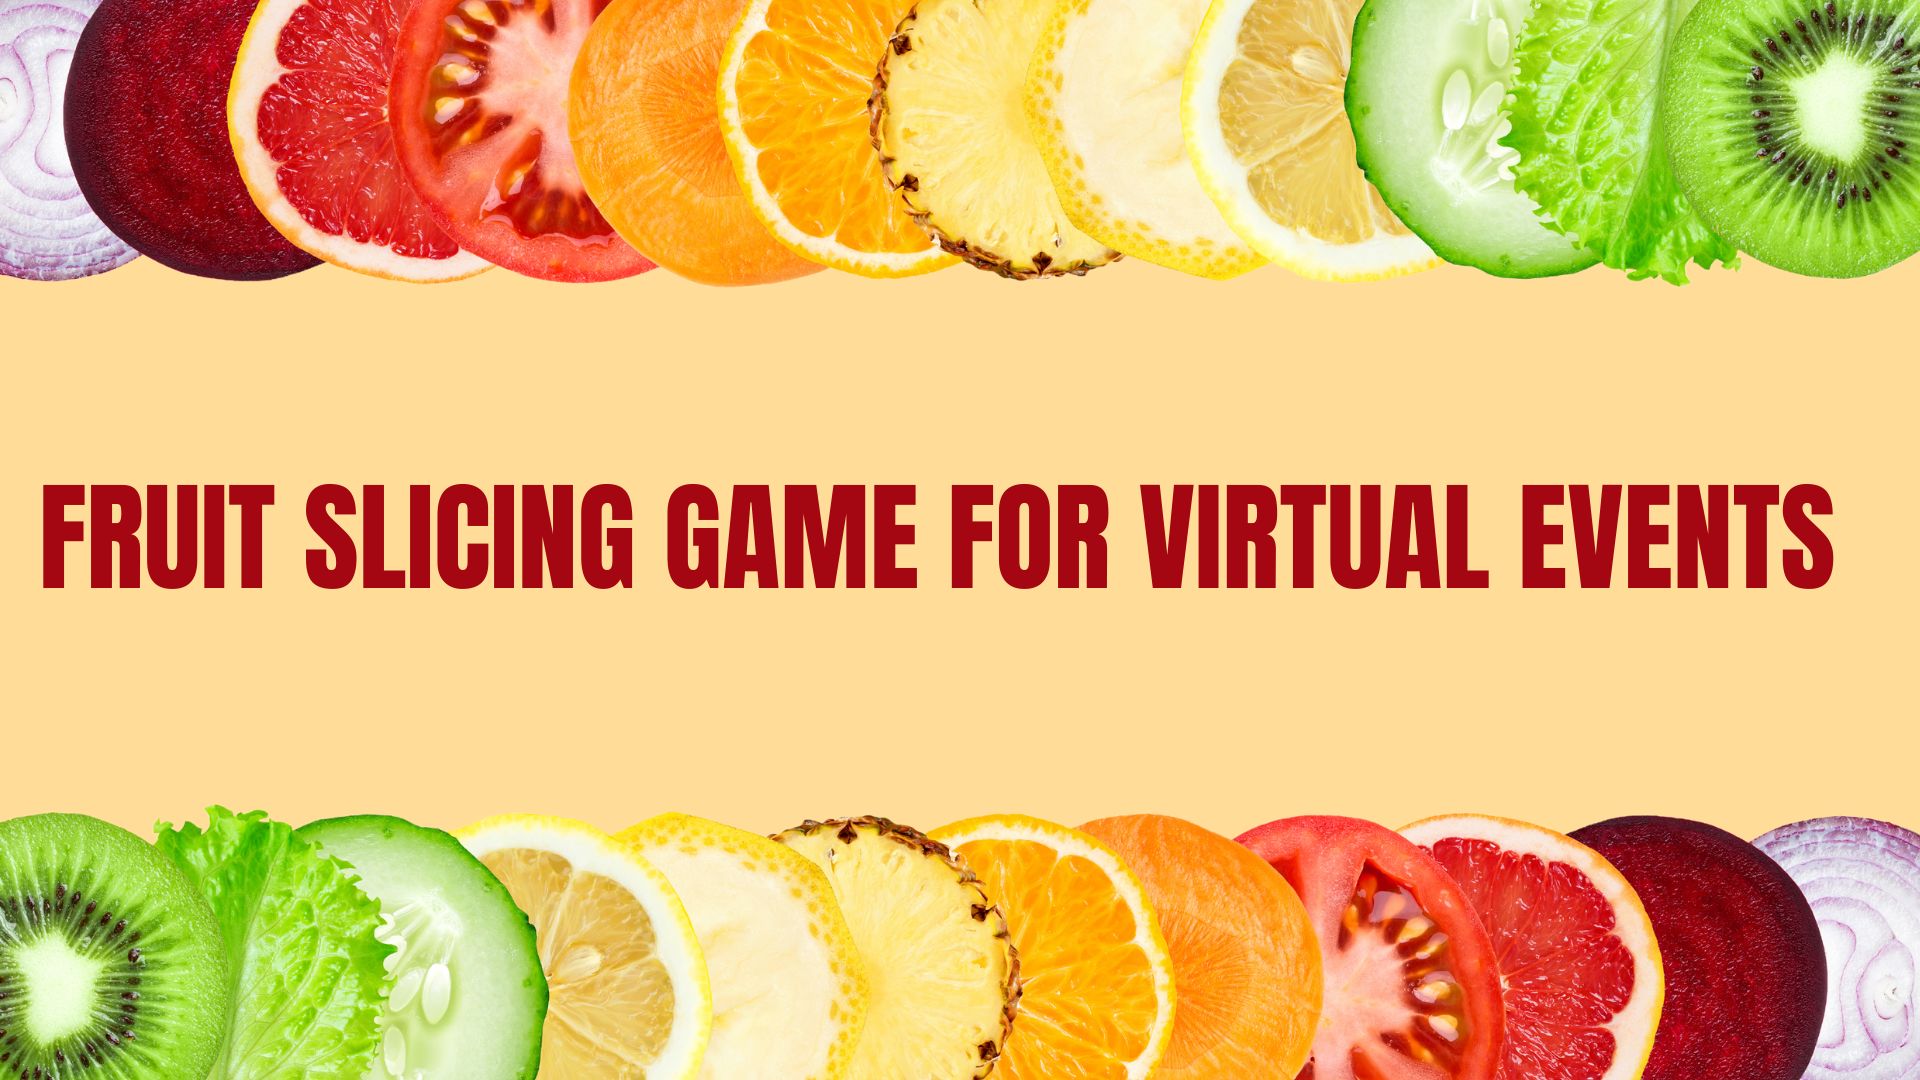 Fruit Slicing Game For Virtual Events